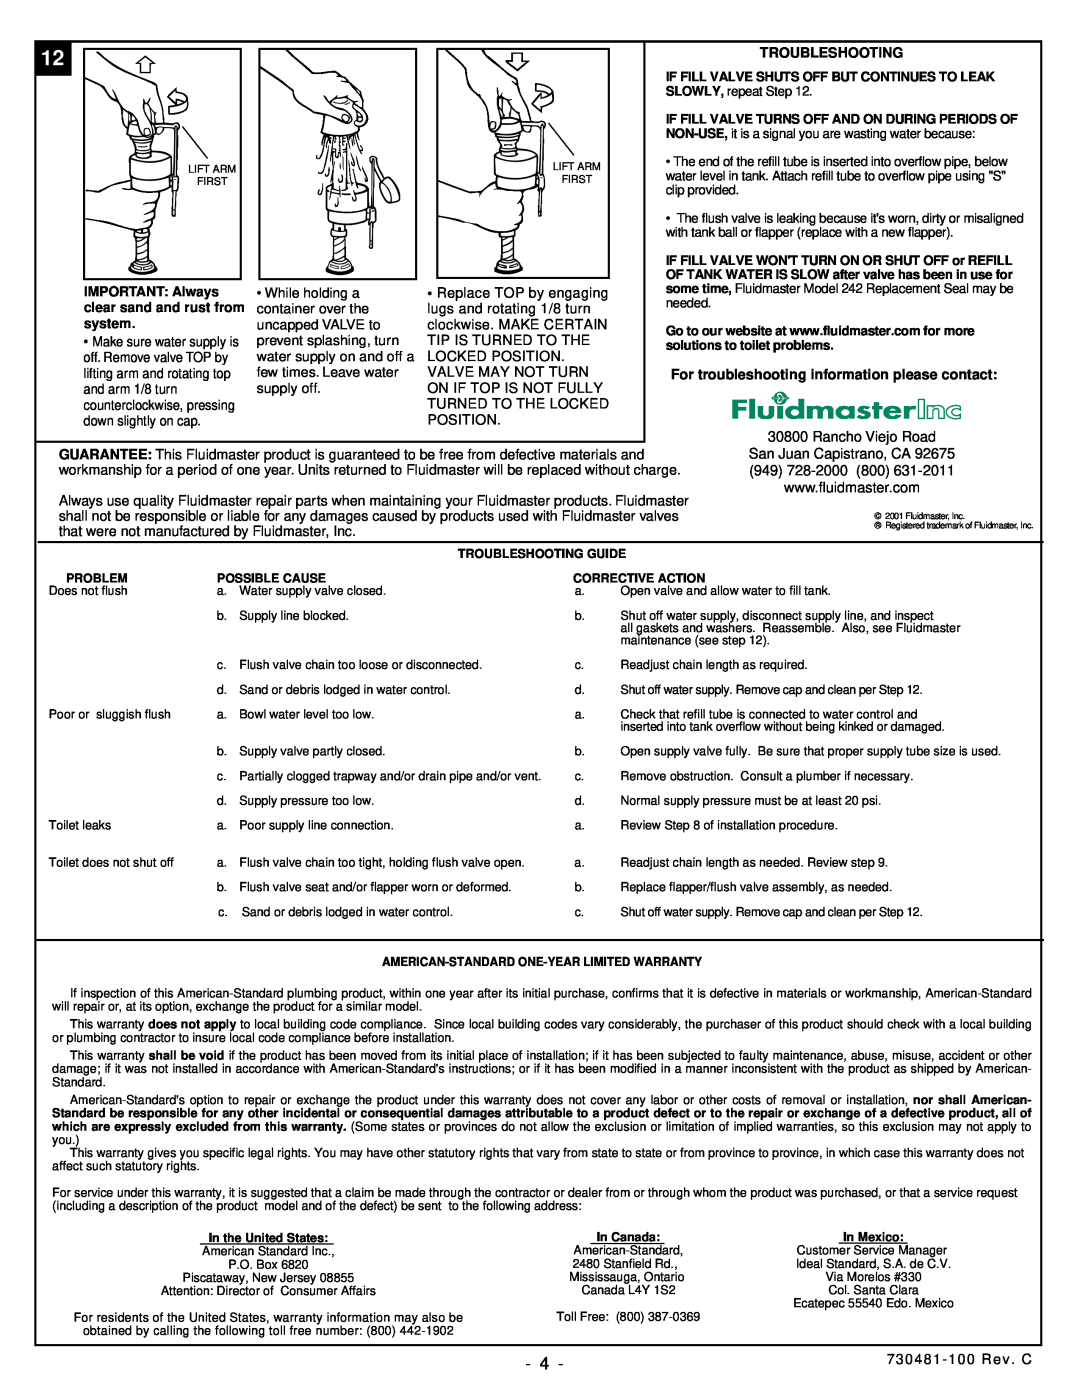 American Standard 2100 Troubleshooting, For troubleshooting information please contact, IMPORTANT Always, system 